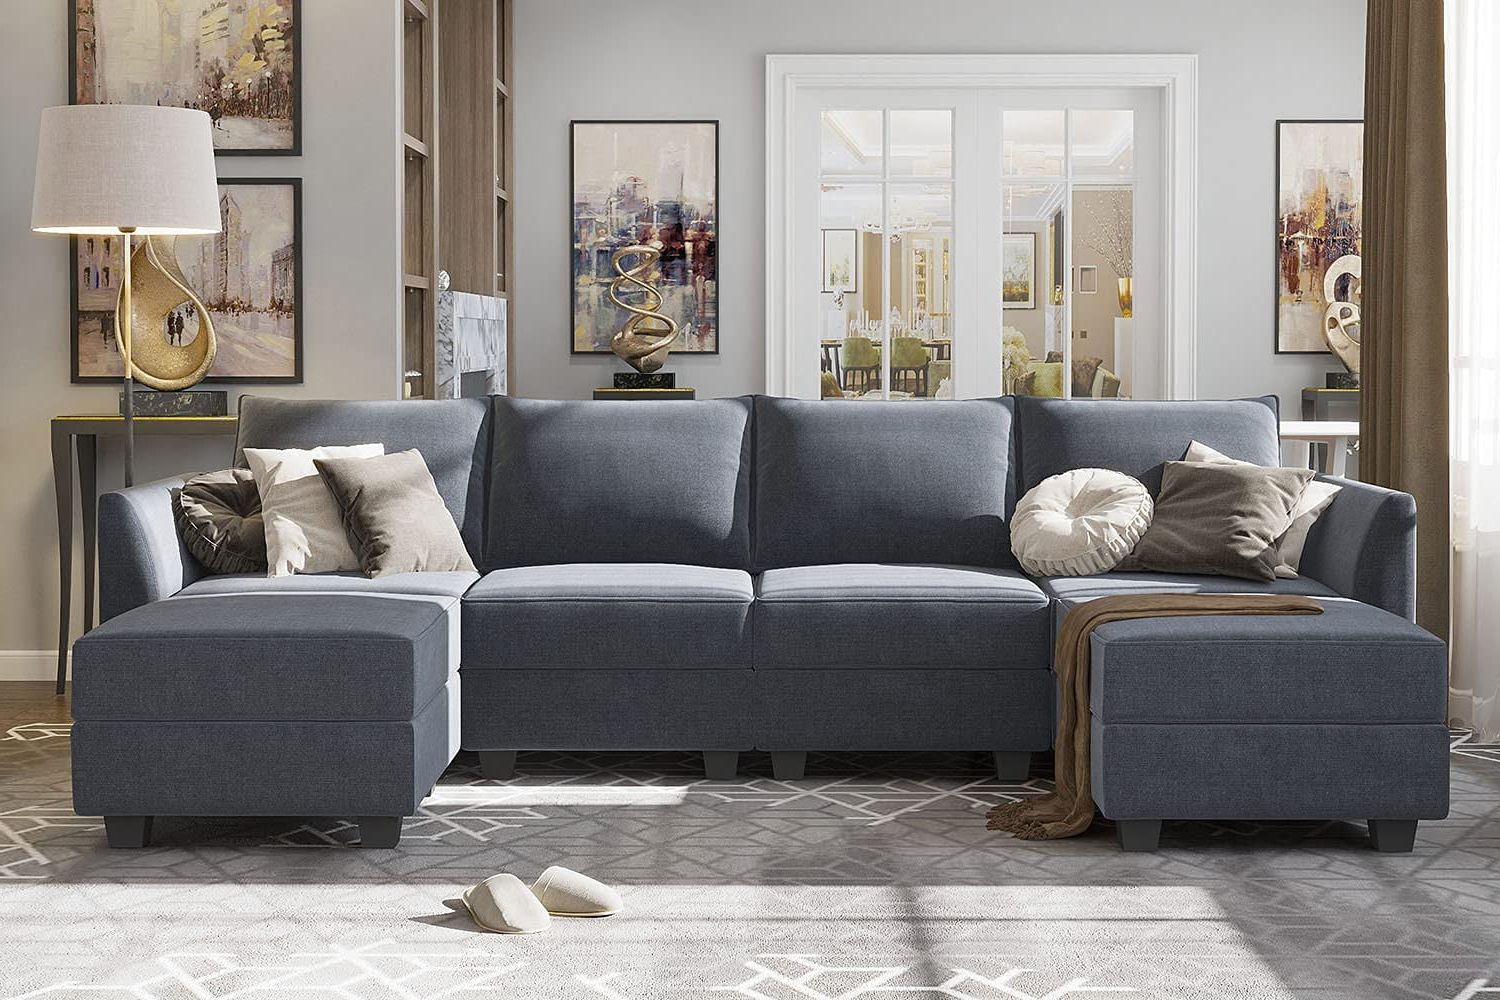 Honbay Sectional Couch With Reversible Chaise Modern L Shape Sofa 4 Regarding Sofas In Bluish Grey (View 5 of 20)